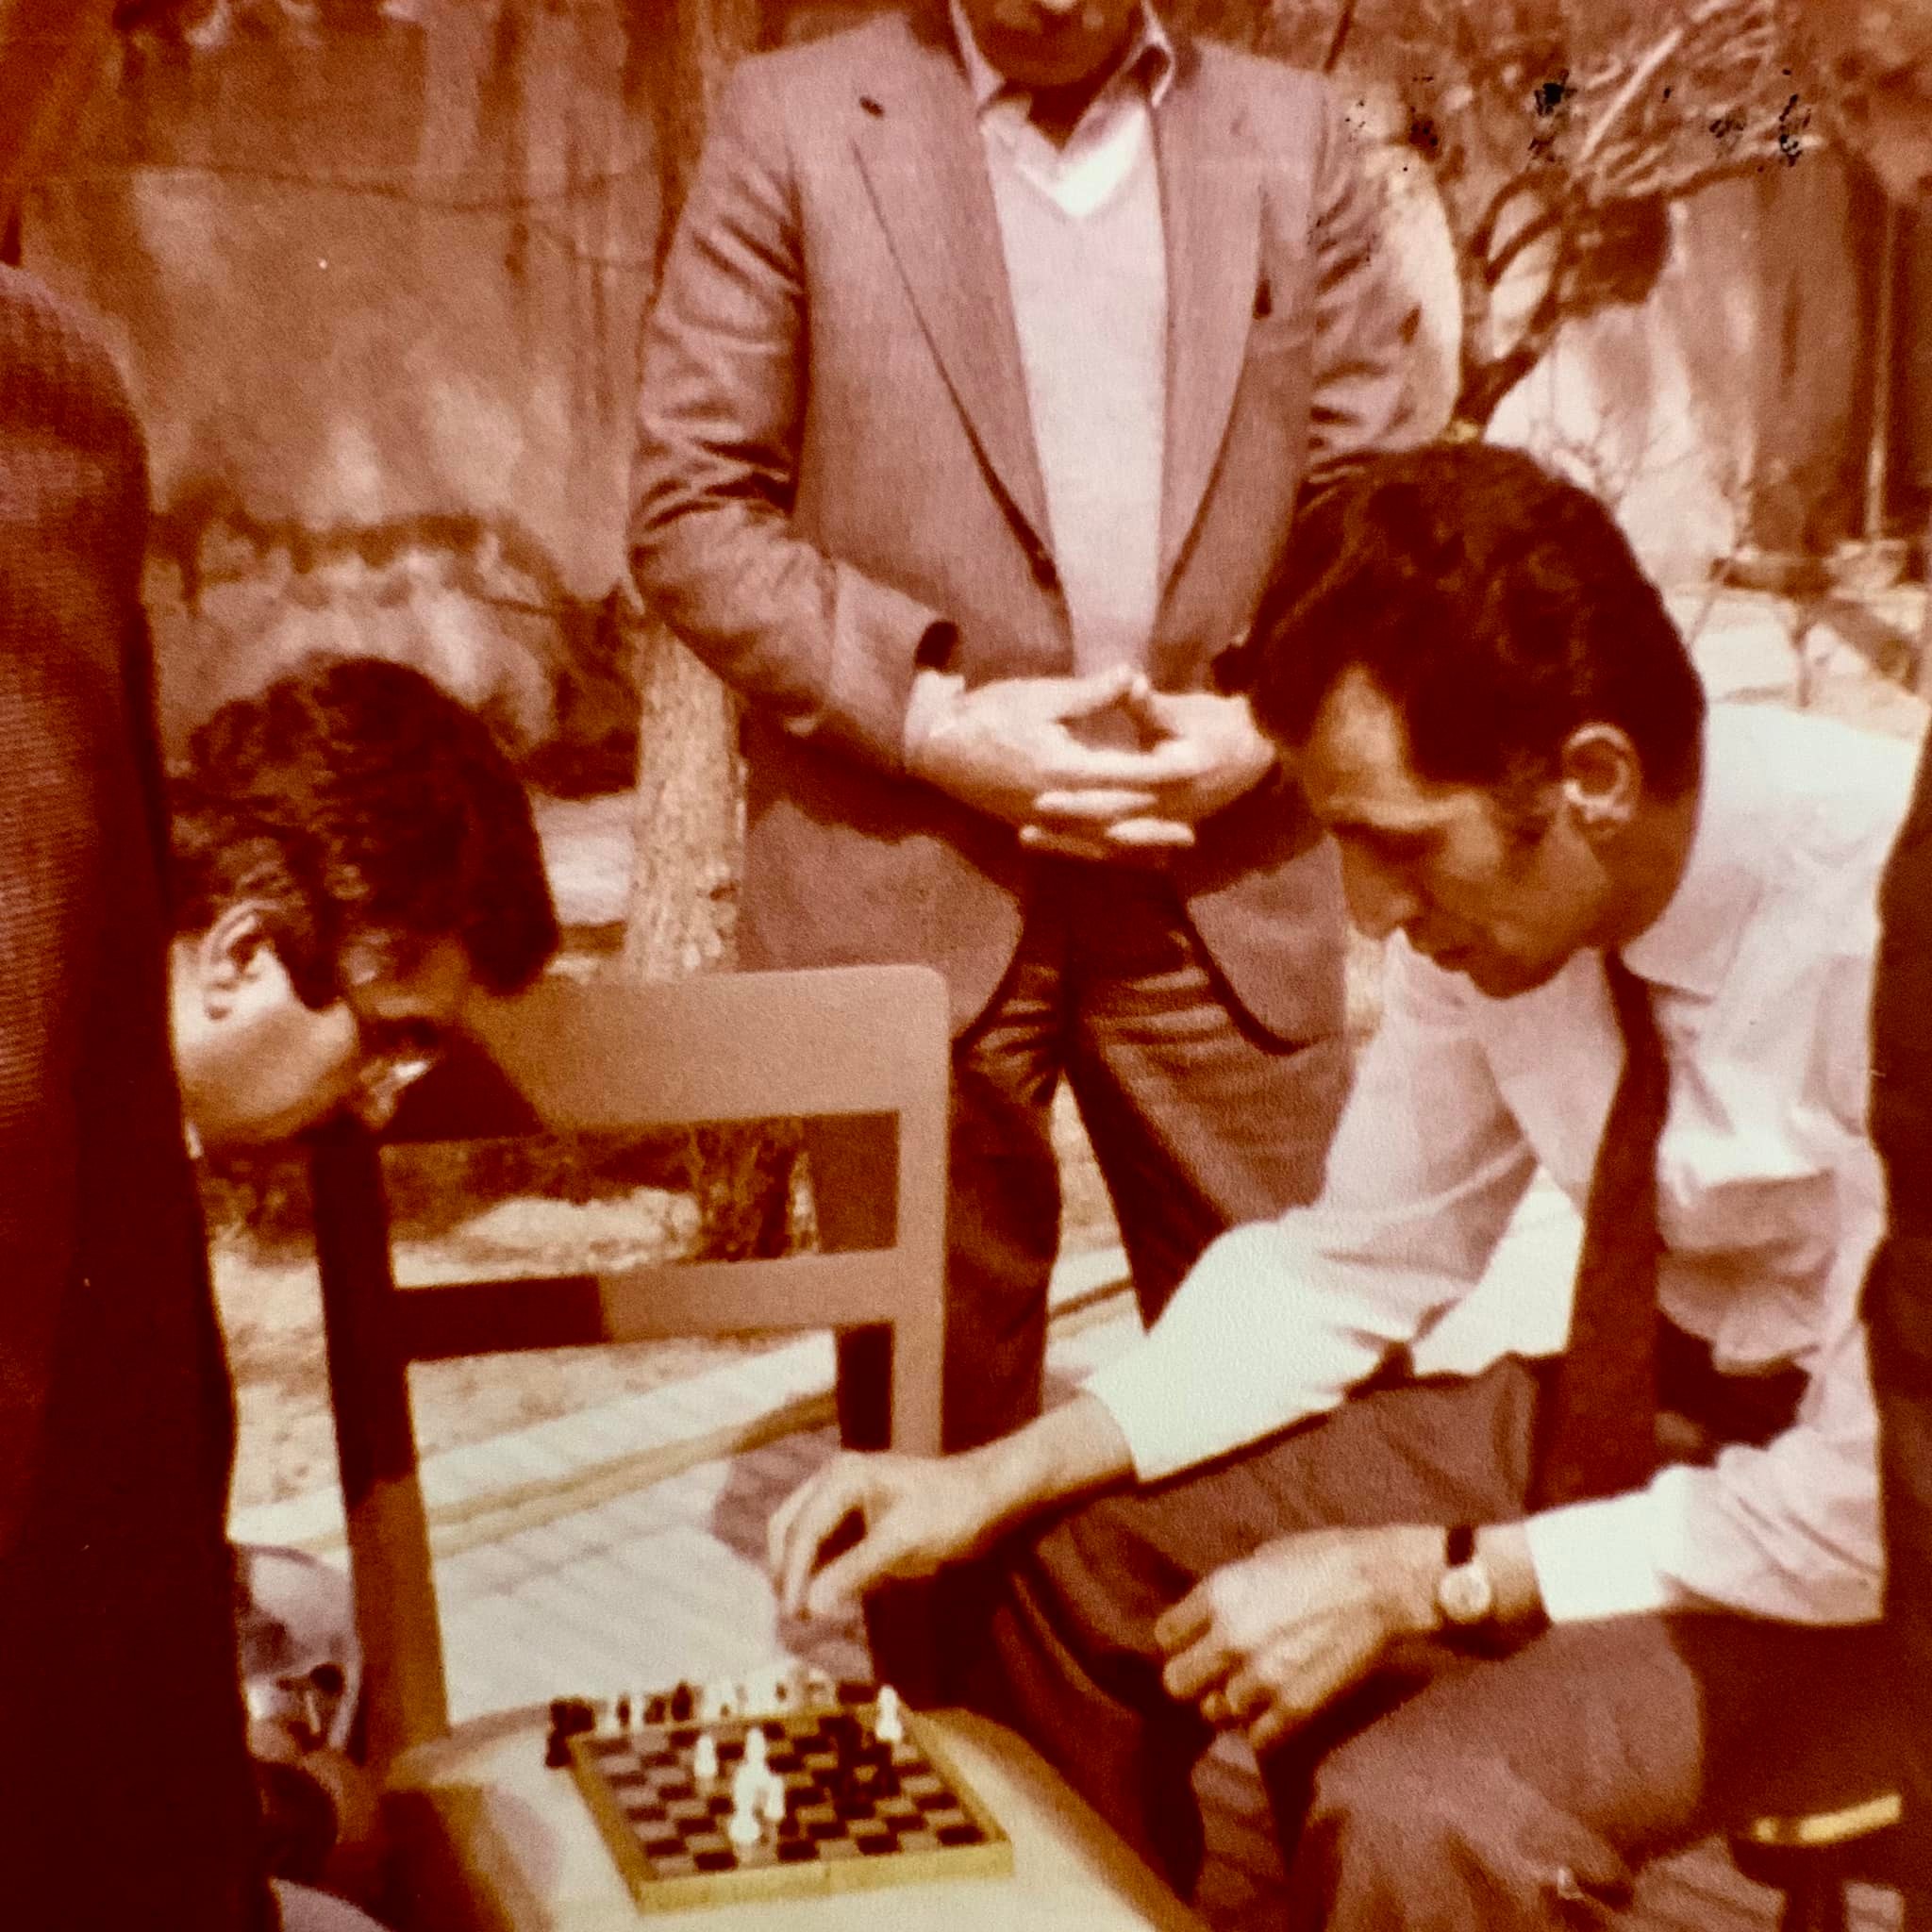 Playing chess with my uncle Farrokh in the early 1980s